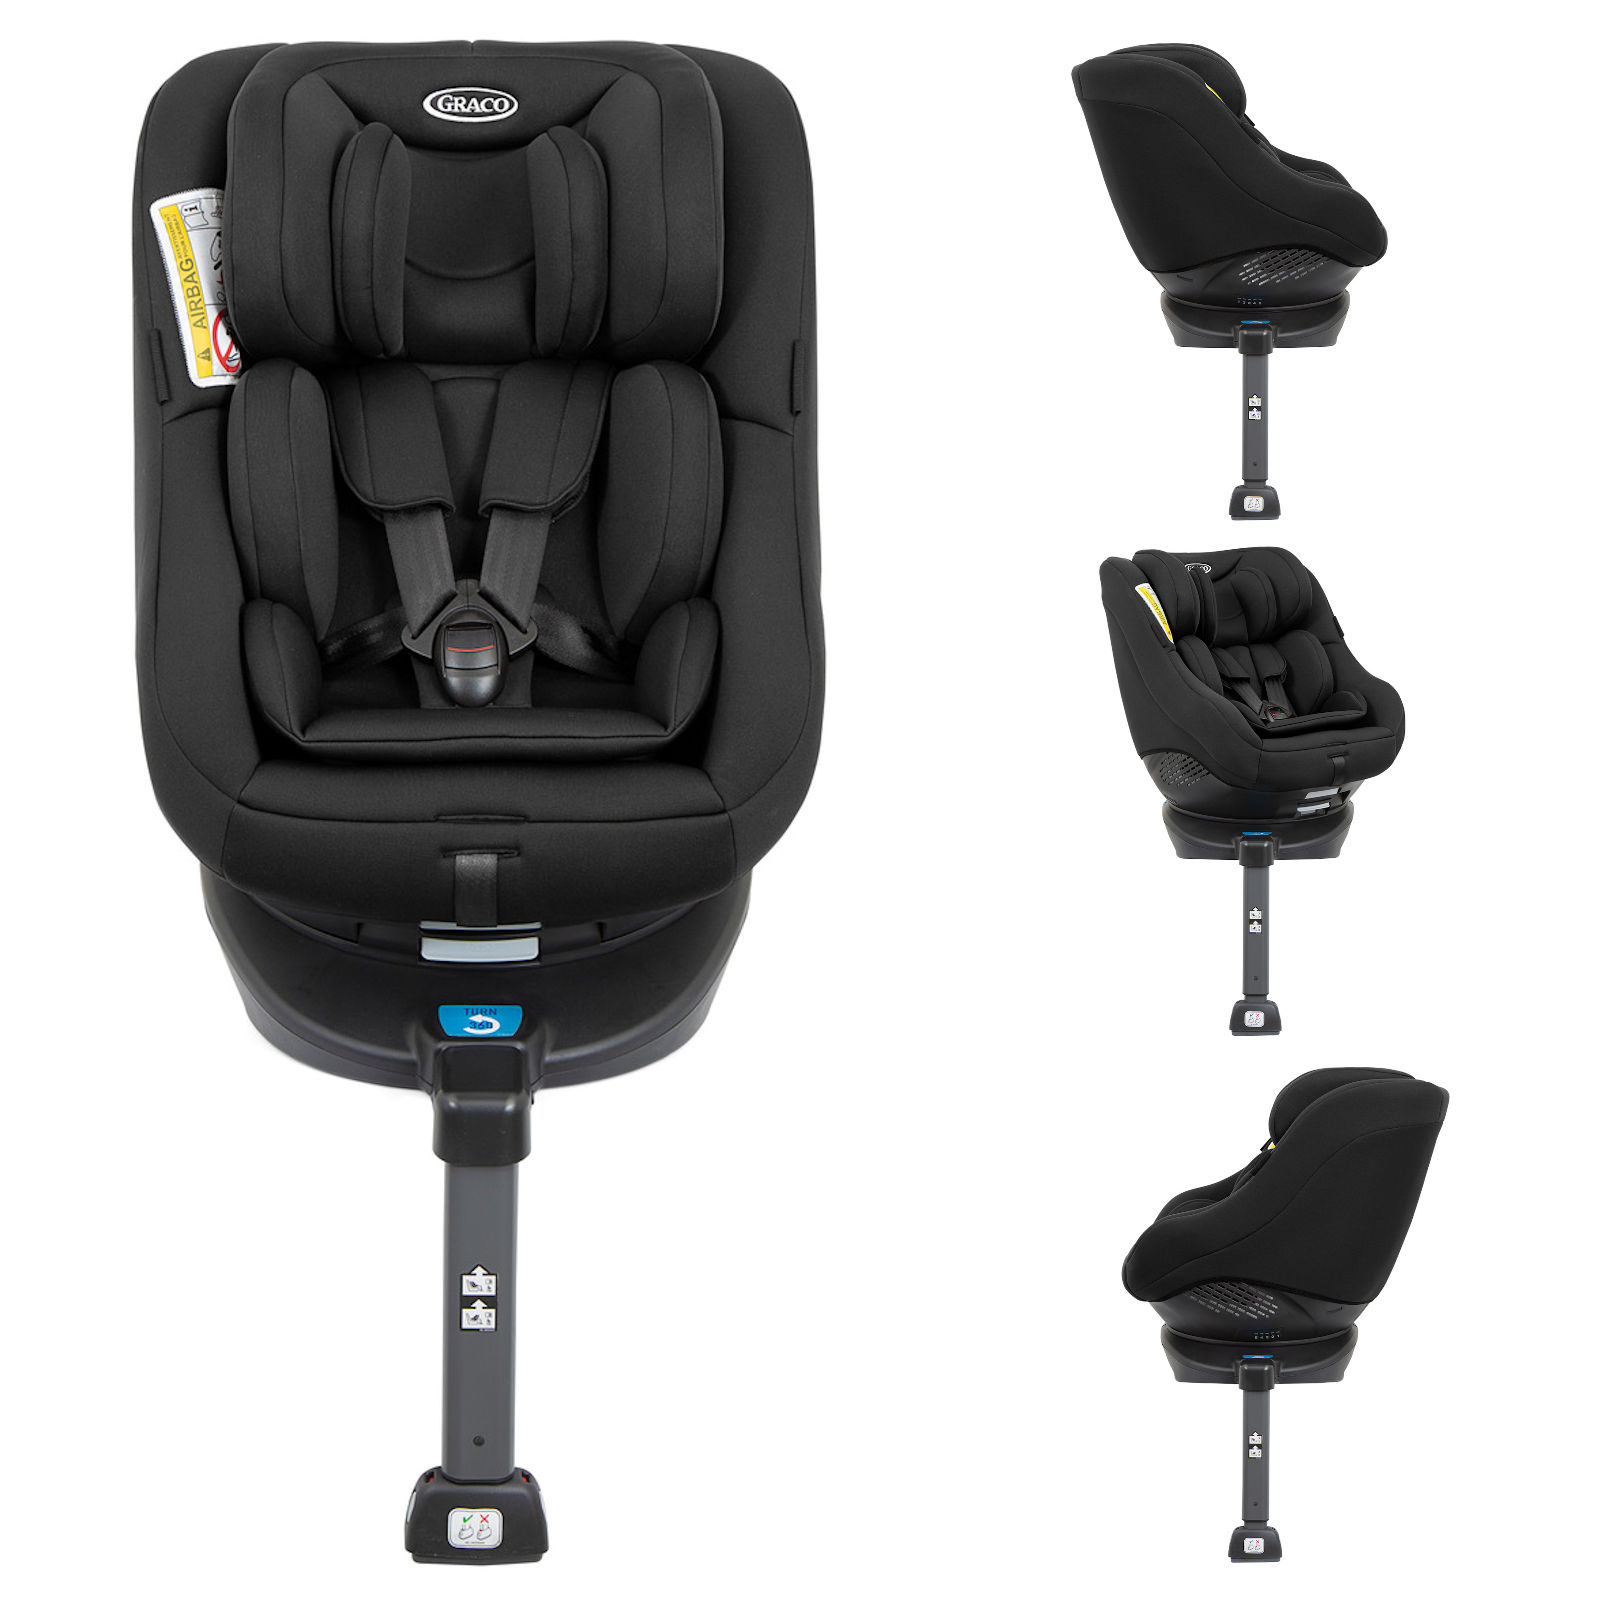 Graco Turn2Me Group 0+/1 Spin Rotate ISOFIX Car Seat - Black...